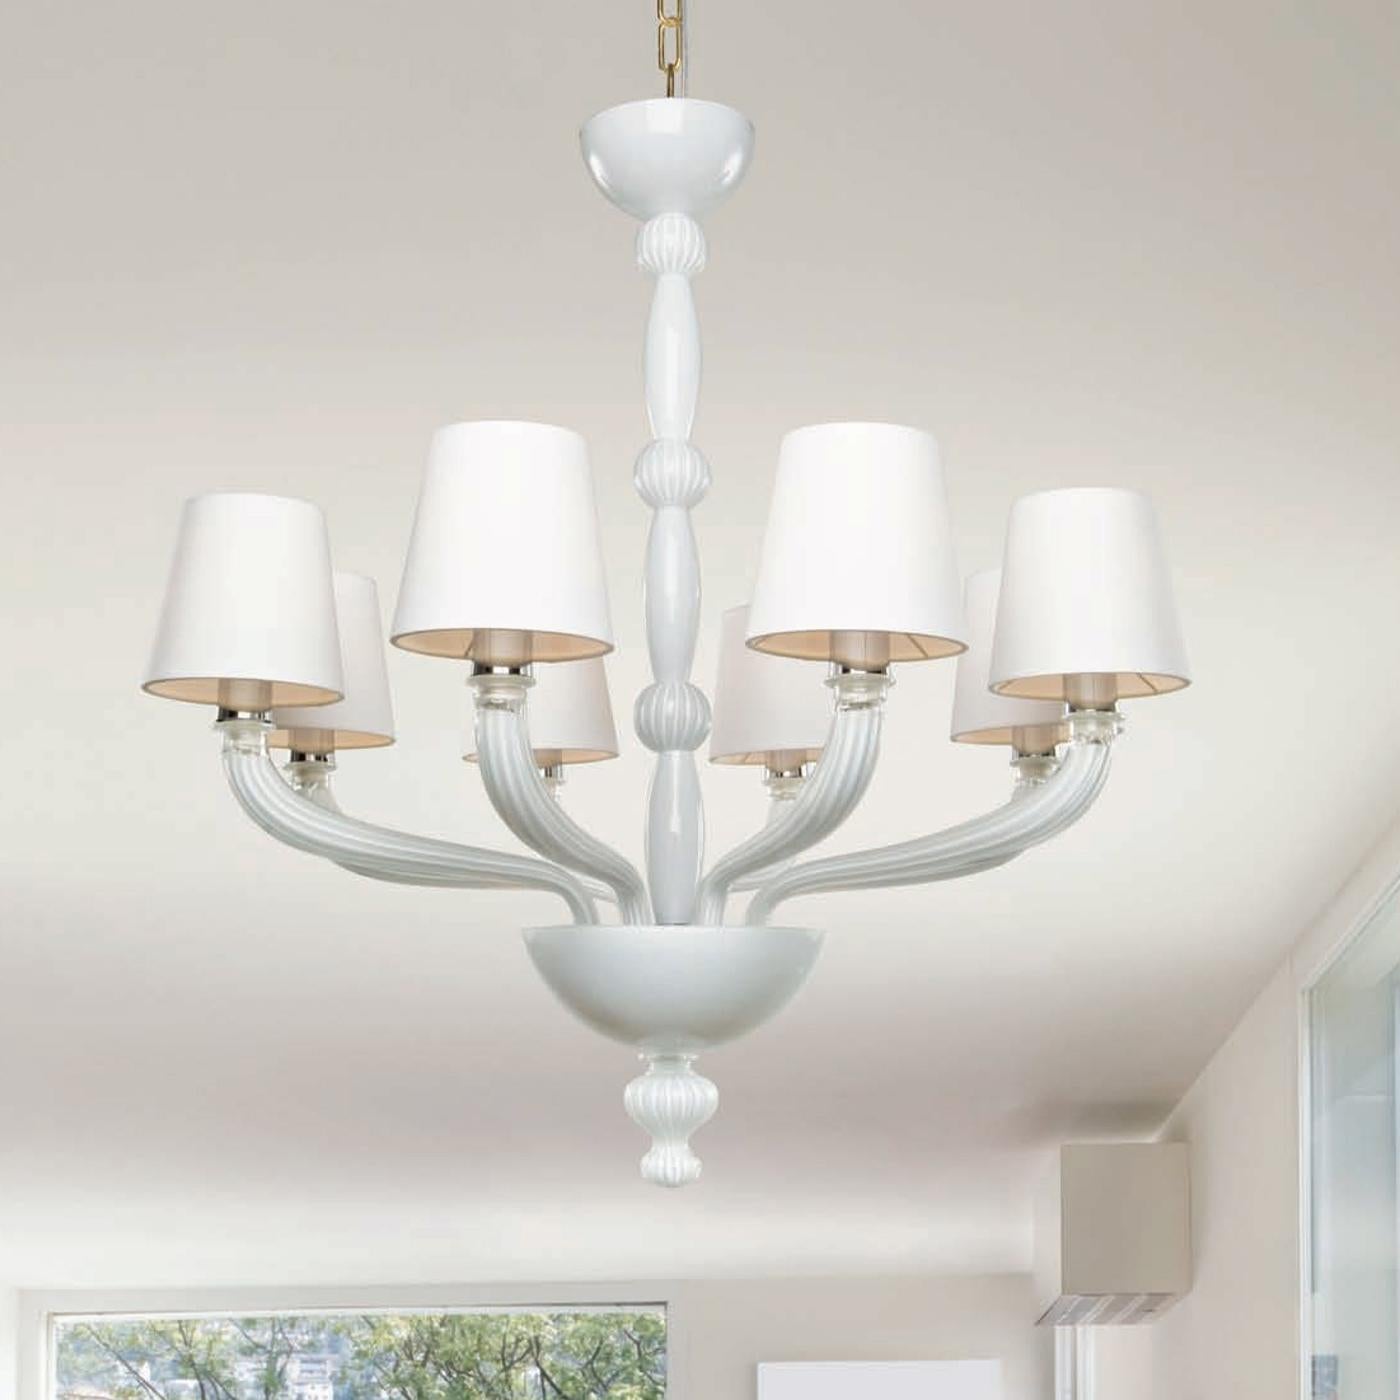 Masterfully crafted of white blown Murano glass, this modern chandelier is part of the Mazzega 1946 historical archives from the early 20th century. It is characterized by a sinuous central stem composed of alternating elliptical and spherical